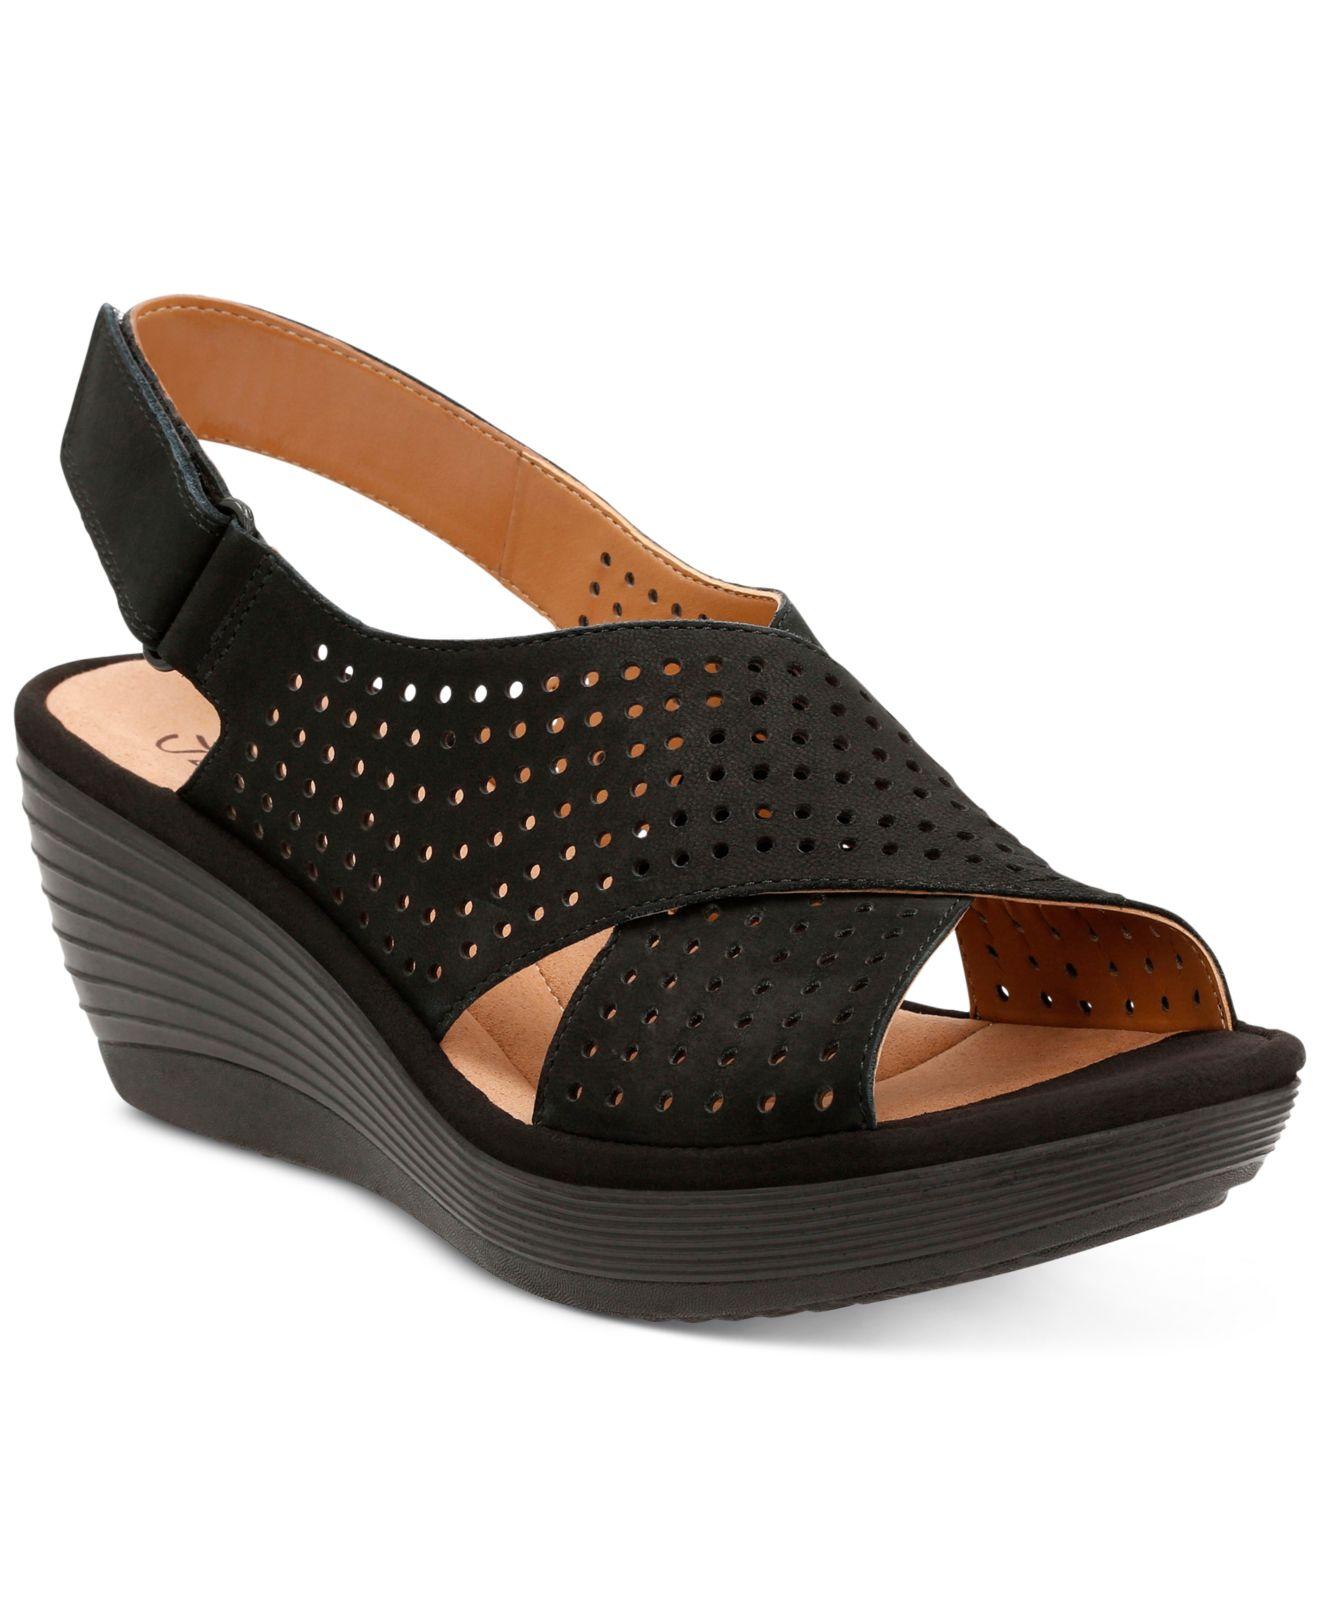 Clarks Leather Women's Reedly Variel Wedge Sandals in Black - Lyst